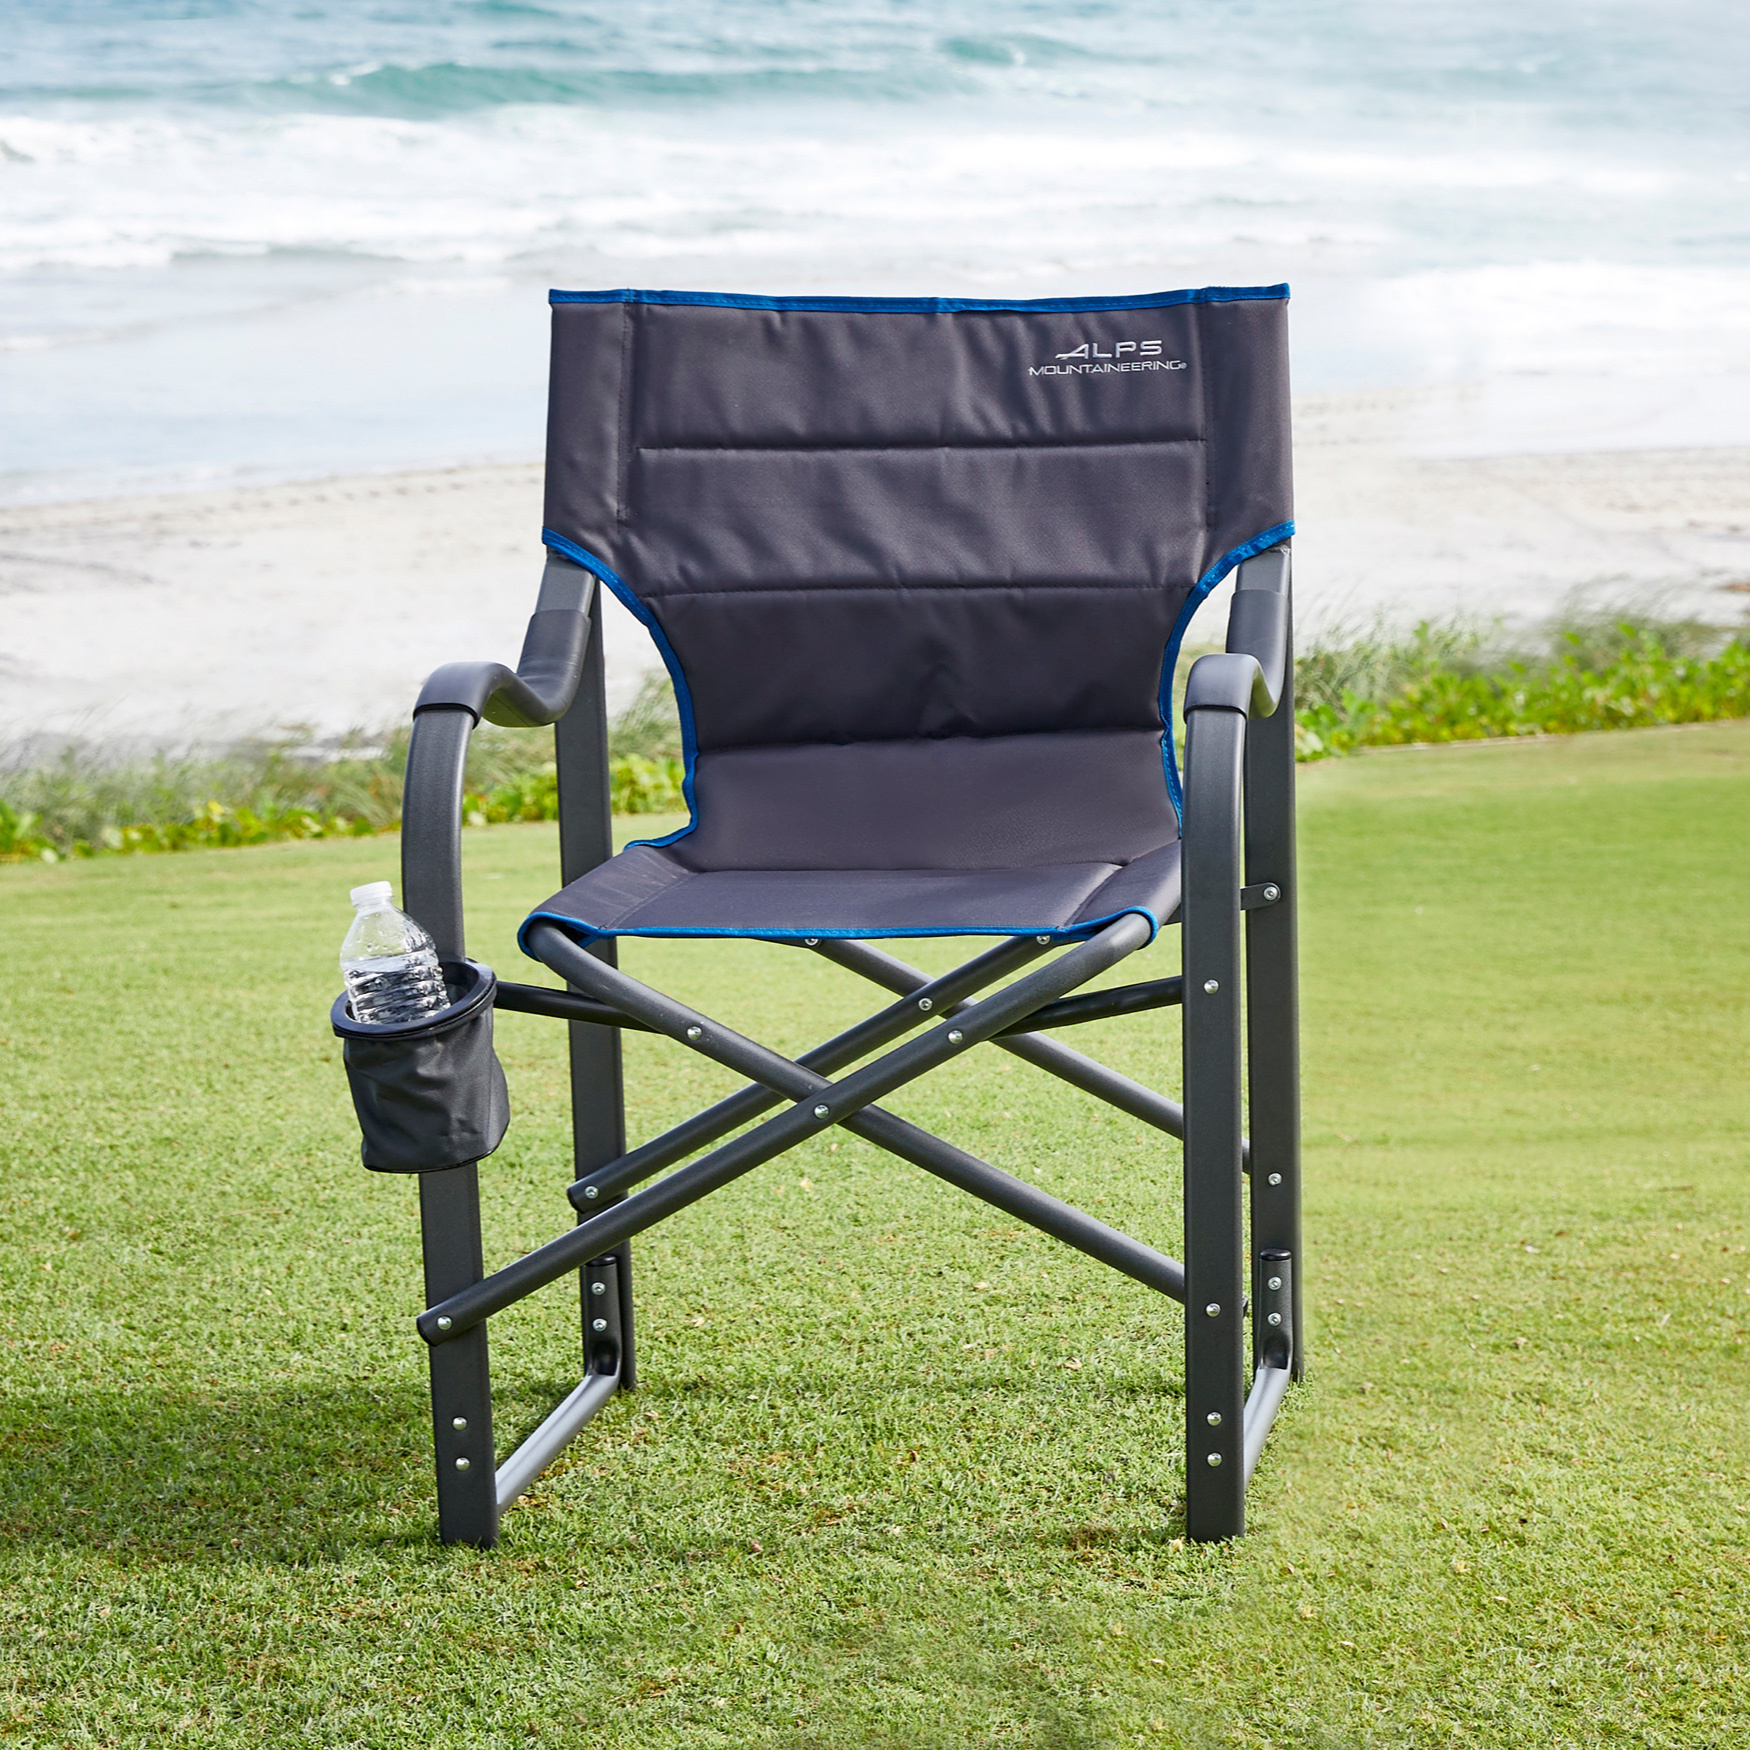 Alps Mountaineering Oversized Director Camp Chair, 